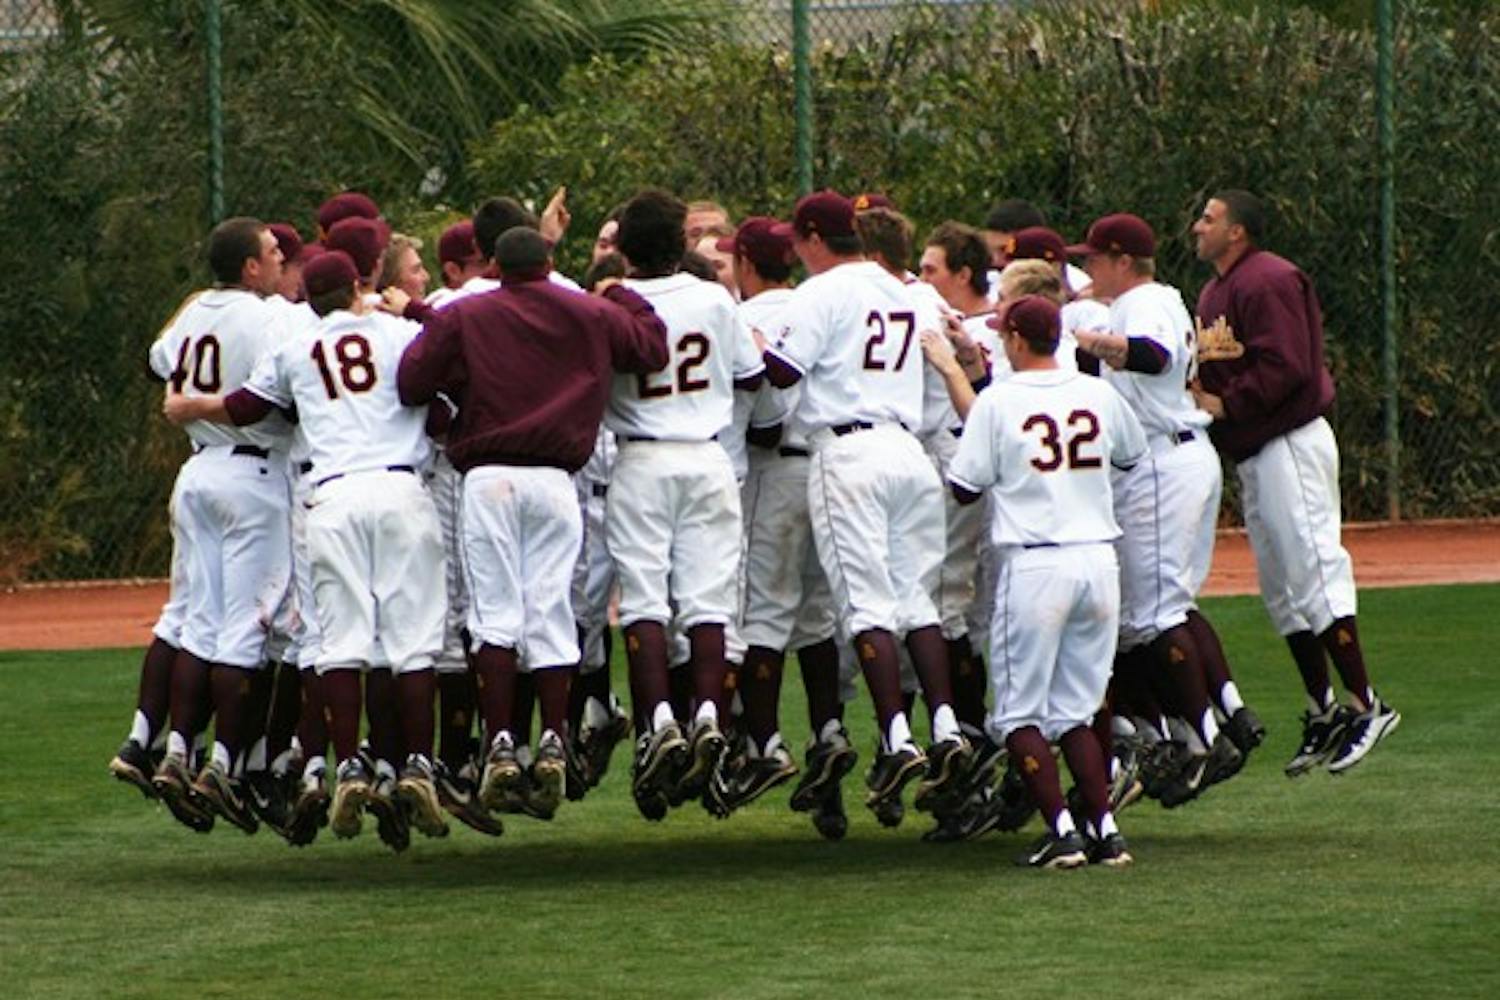 The ASU baseball team rallies together before a game against New Mexico on Feb. 20, 2011. The Sun Devils' goal is to be the No. 1 team in the country although they cannot go to the postseason. (Photo by Lisa Bartoli)